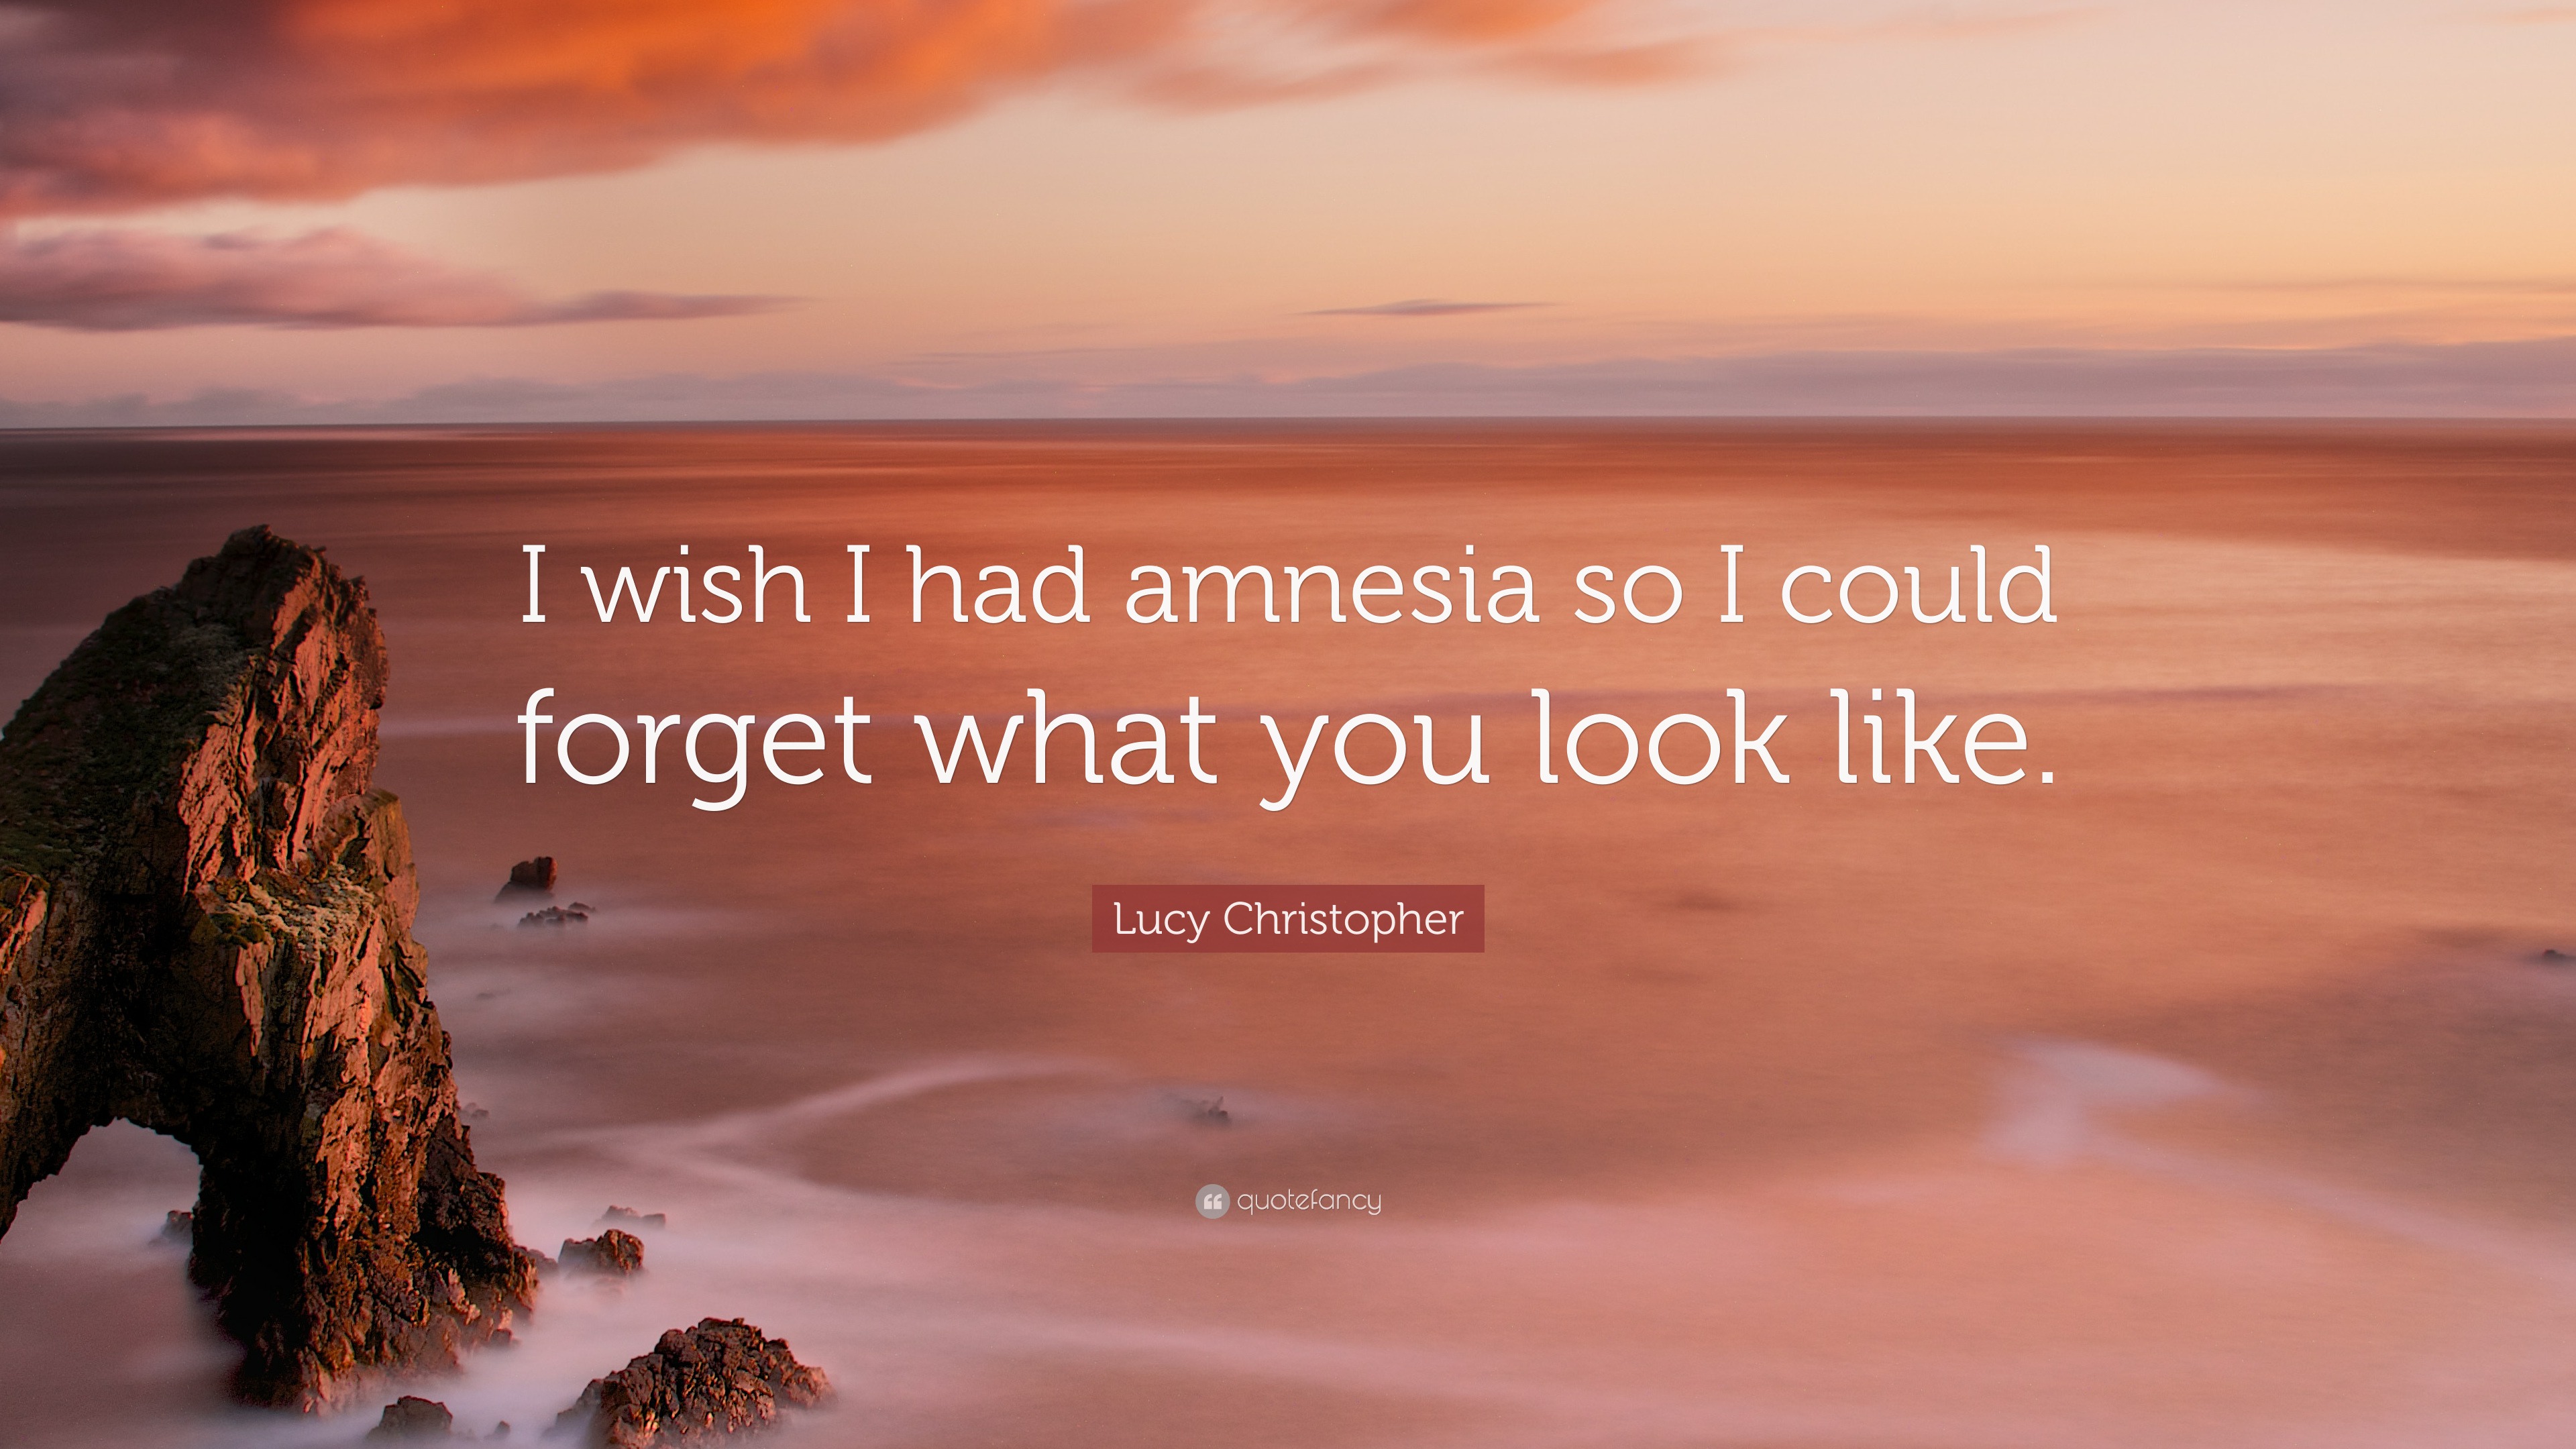 Lucy Christopher Quote: “I wish I had amnesia so I could forget